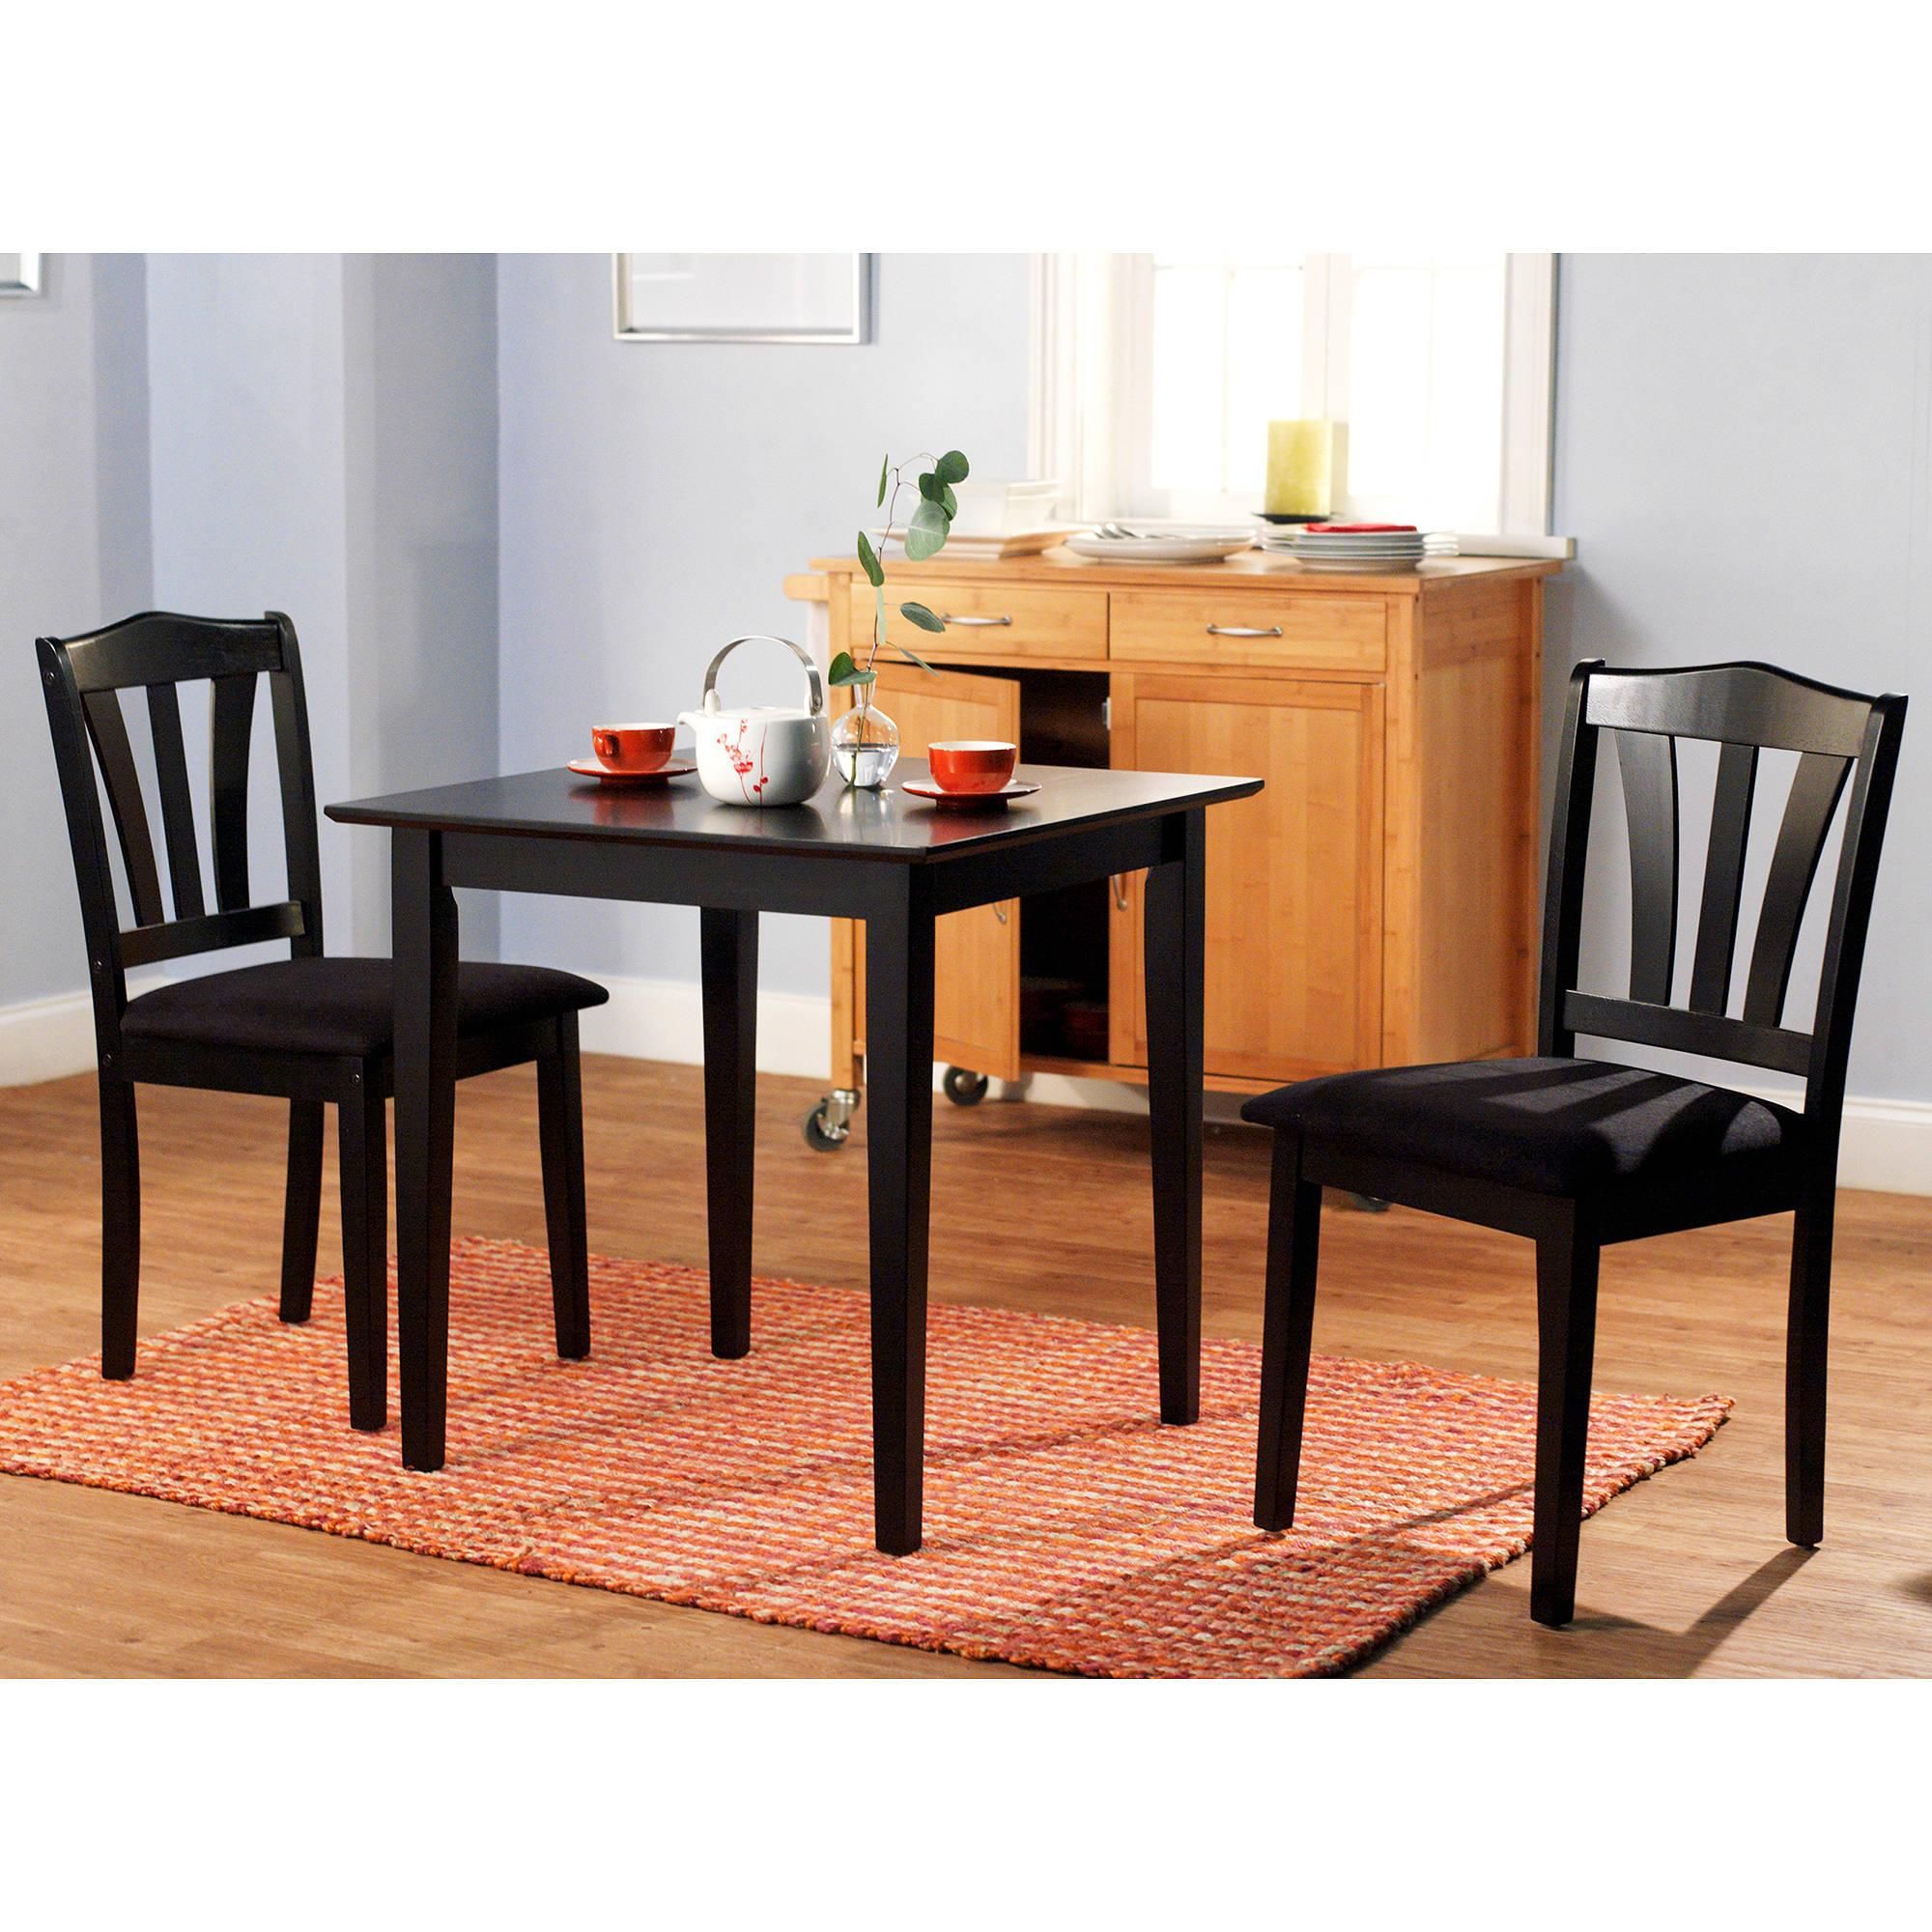 3 Piece Dining Sets With Regard To Best And Newest 3 Piece Dining Set Table 2 Chairs Kitchen Room Wood Furniture (View 8 of 20)